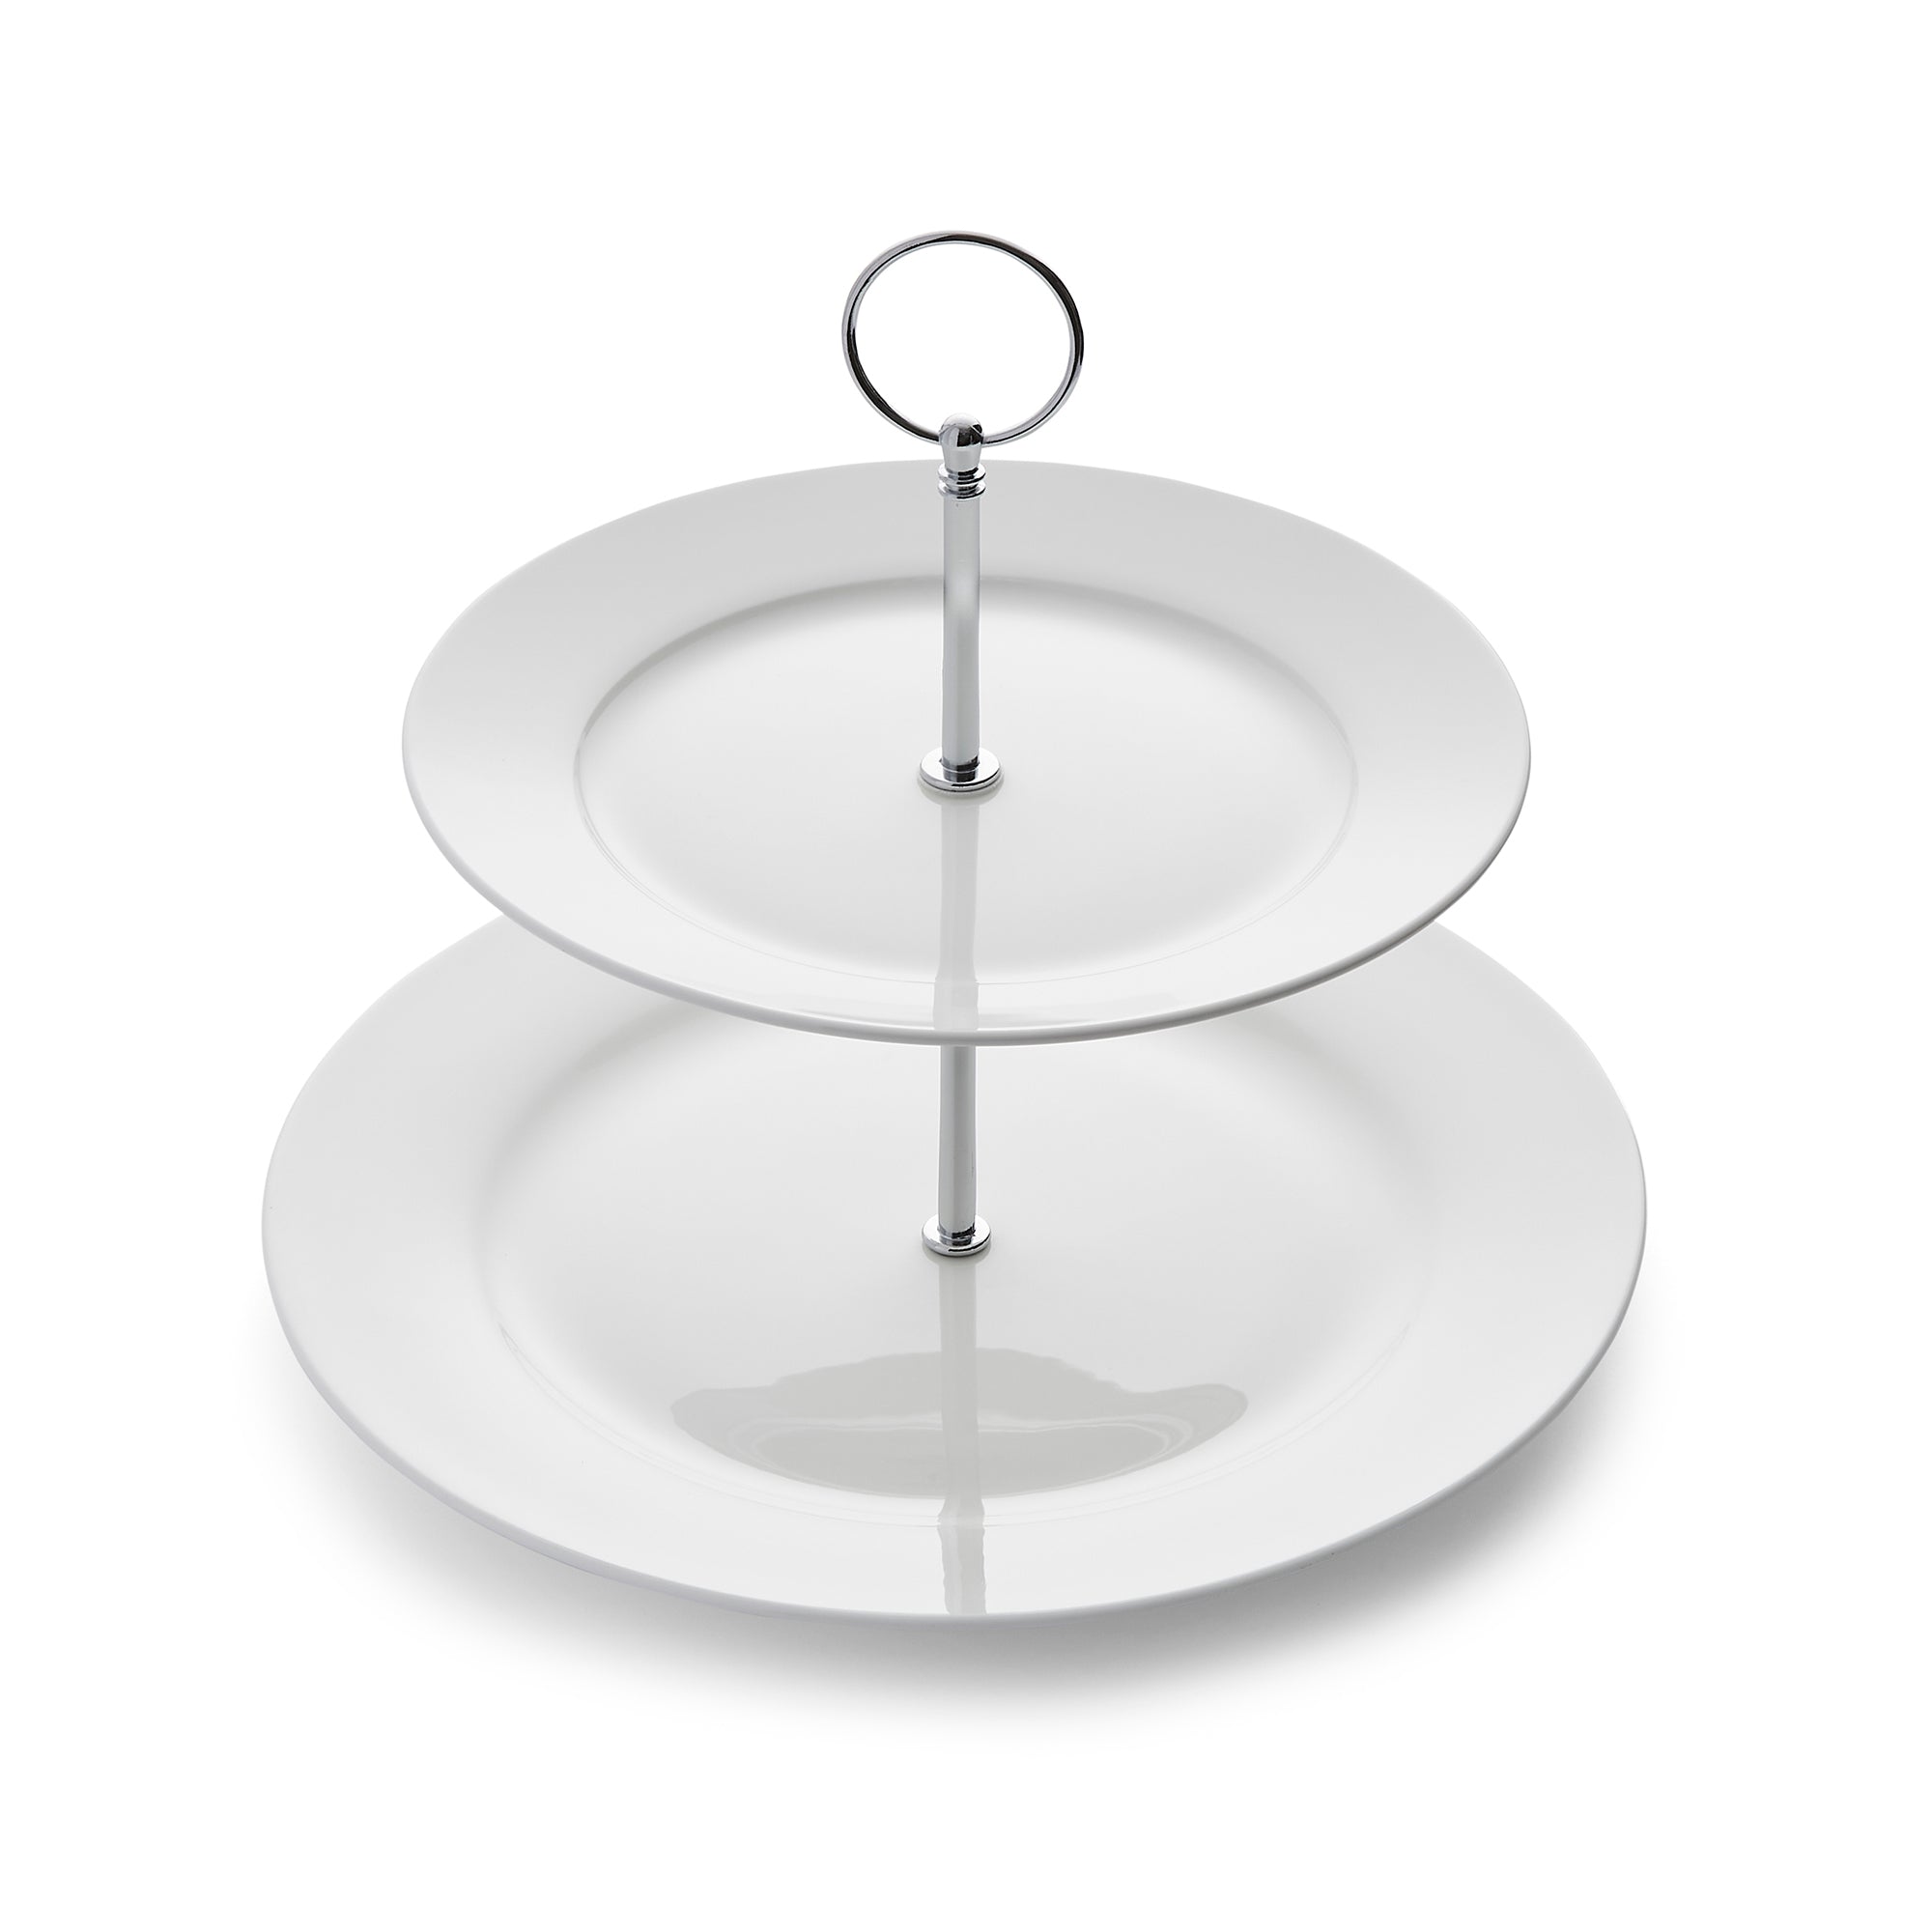 Serendipity White 2-Tier Cake Stand